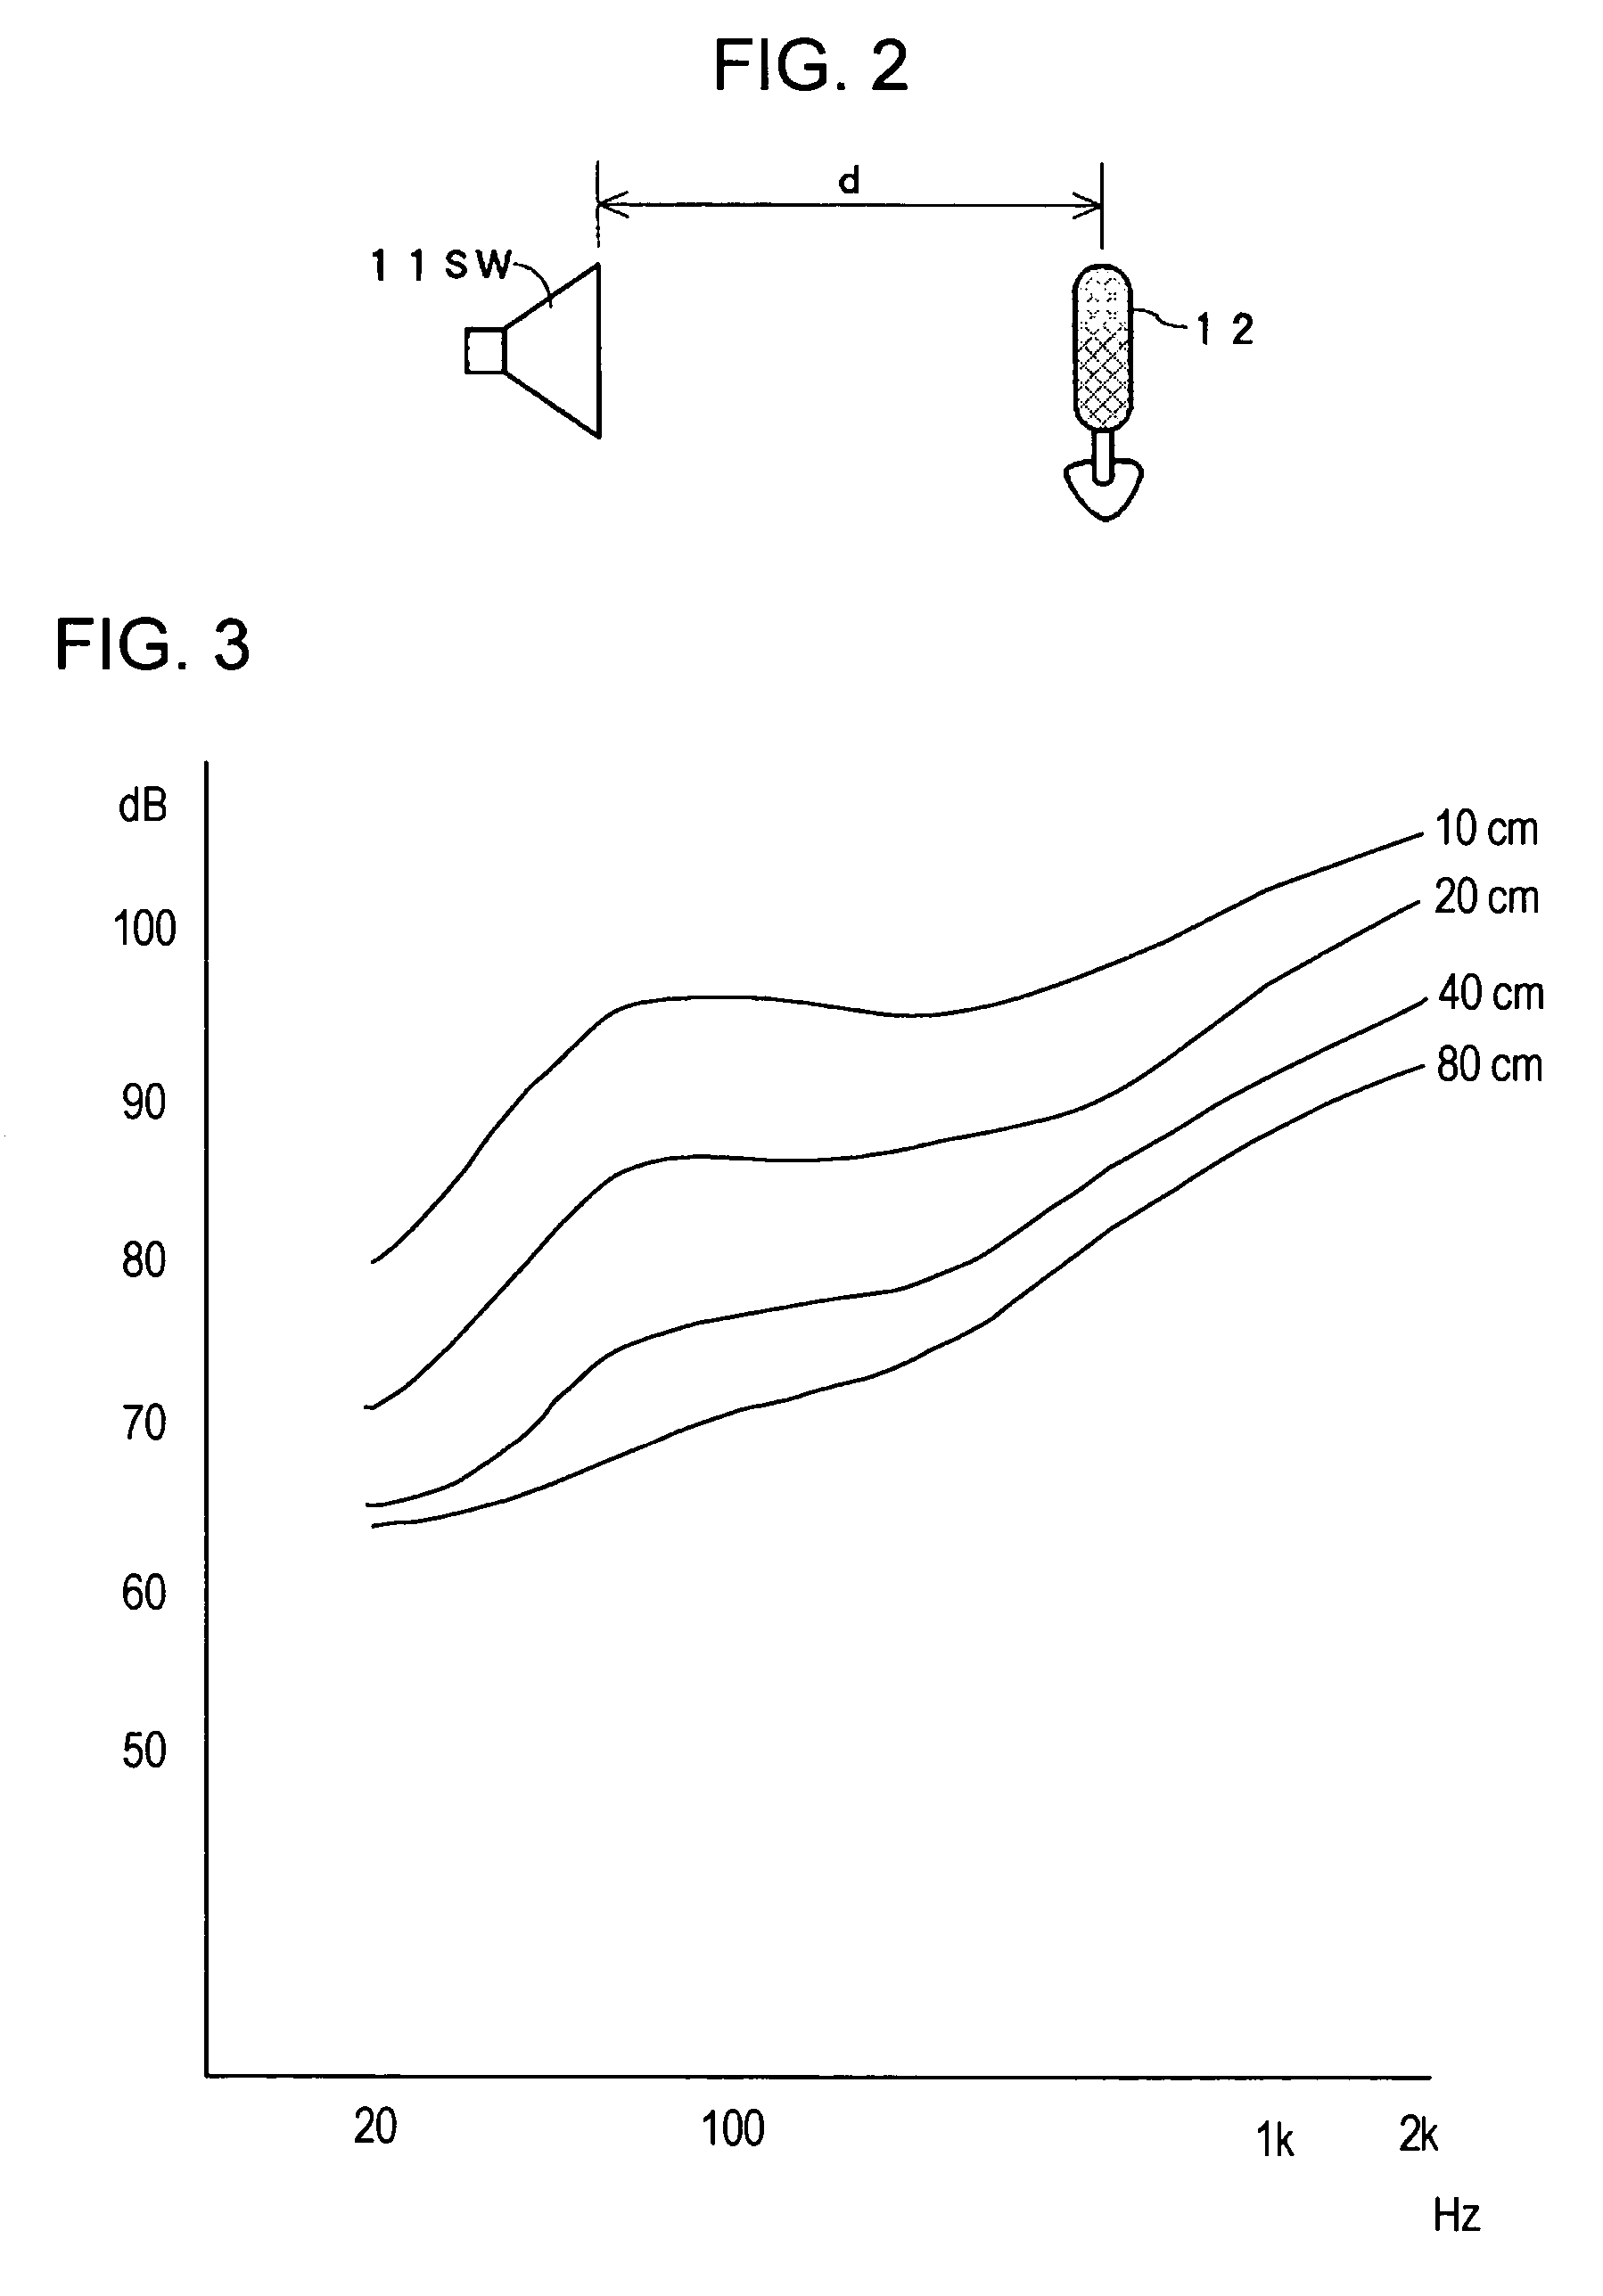 Sound reproduction method and sound reproduction system